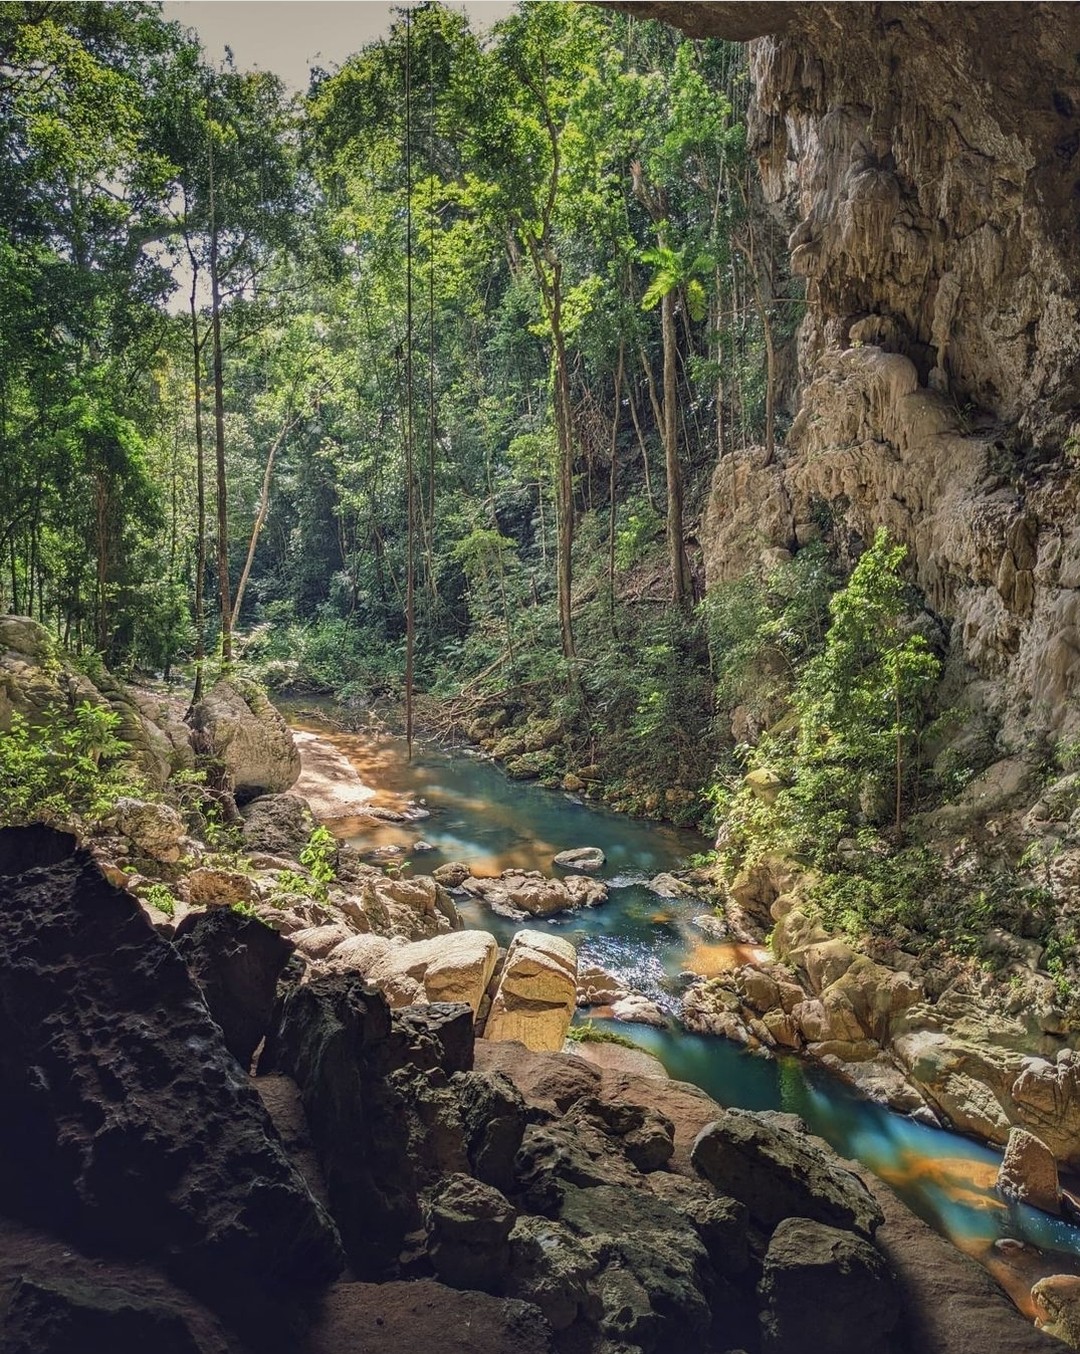 Western Belize is home to an extensive cave network that was once used as spaces for worship, rituals and burials by the Ancient Maya. Be sure to add one of the many caves to your inland itinerary. #travelbelize

📸: @wanderesswithastory